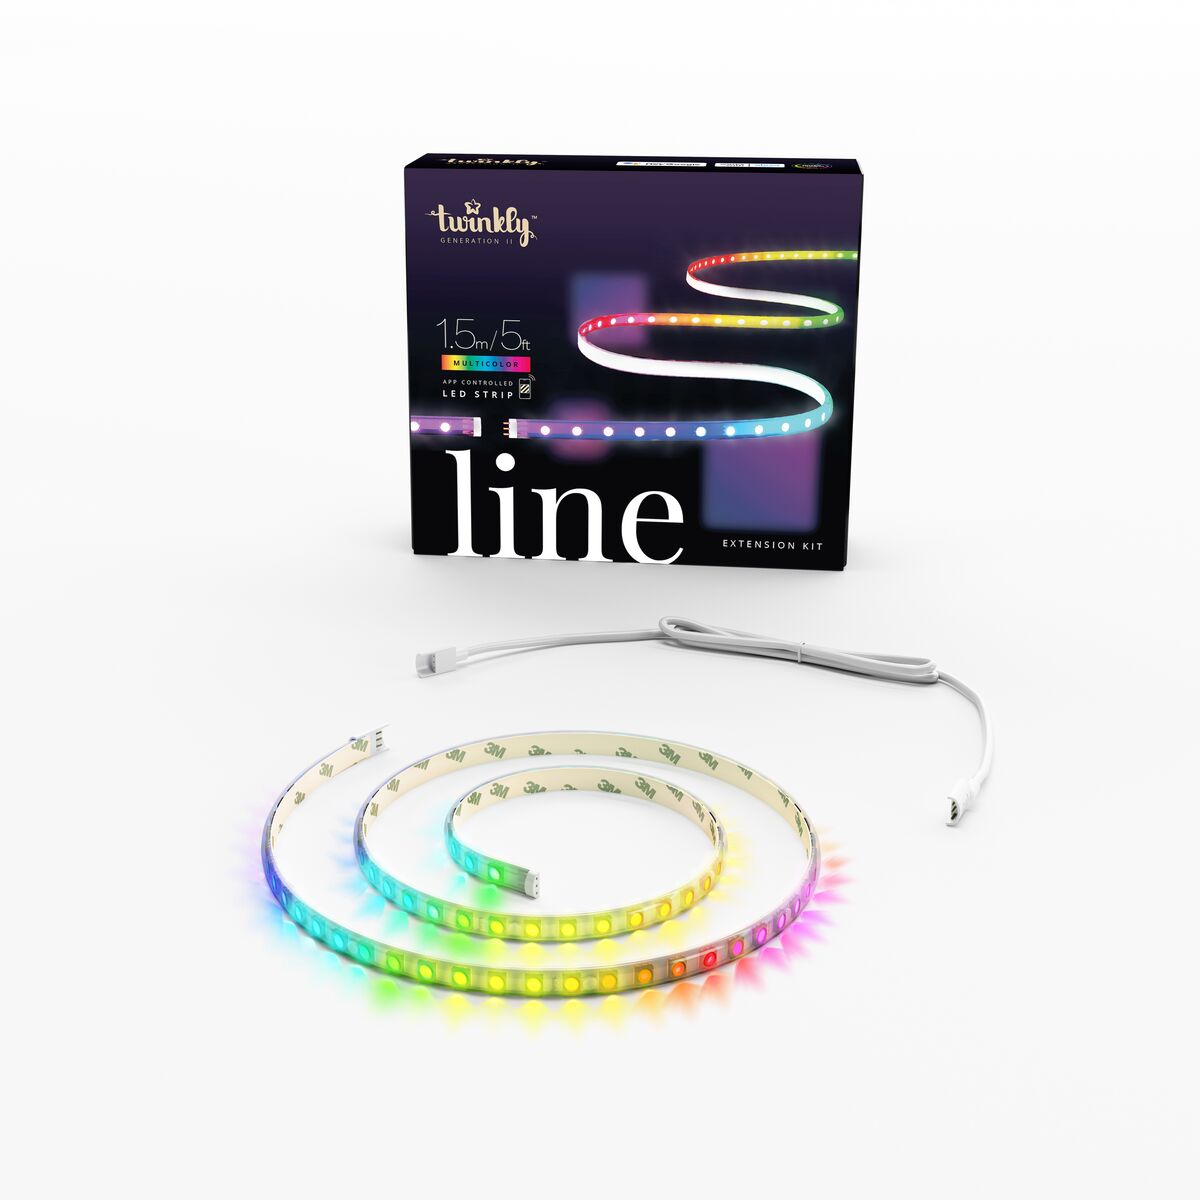 TWINKLY LINE Expansion Kit - 1.5M 90 LEDs RGB App-Controlled Adhesive + Magnetic LED Light Strip Gen II - White